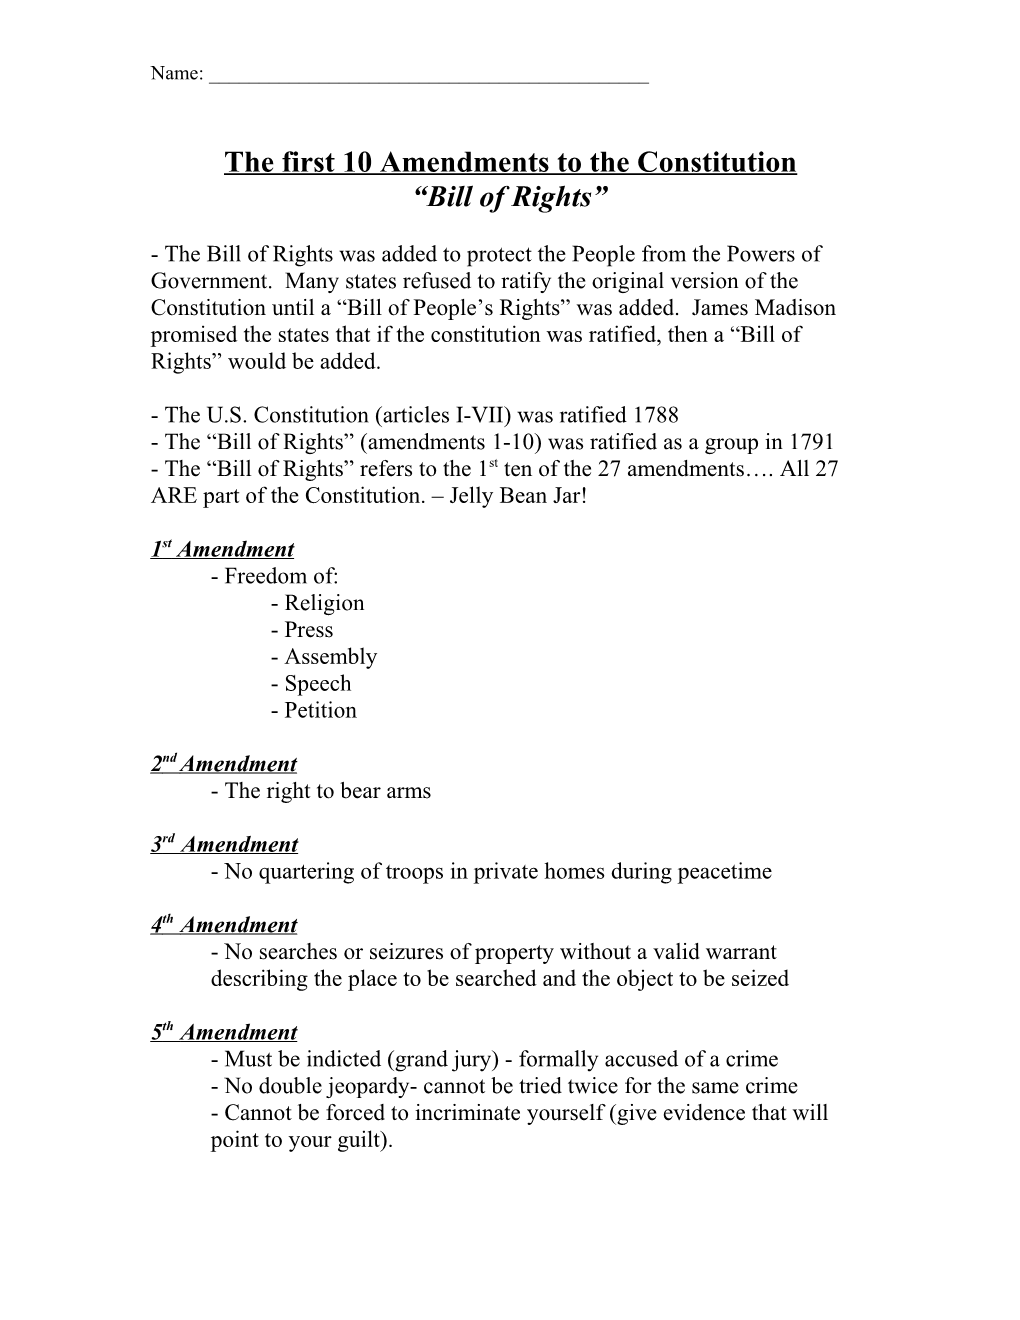 The First 10 Amendments to the Constitution